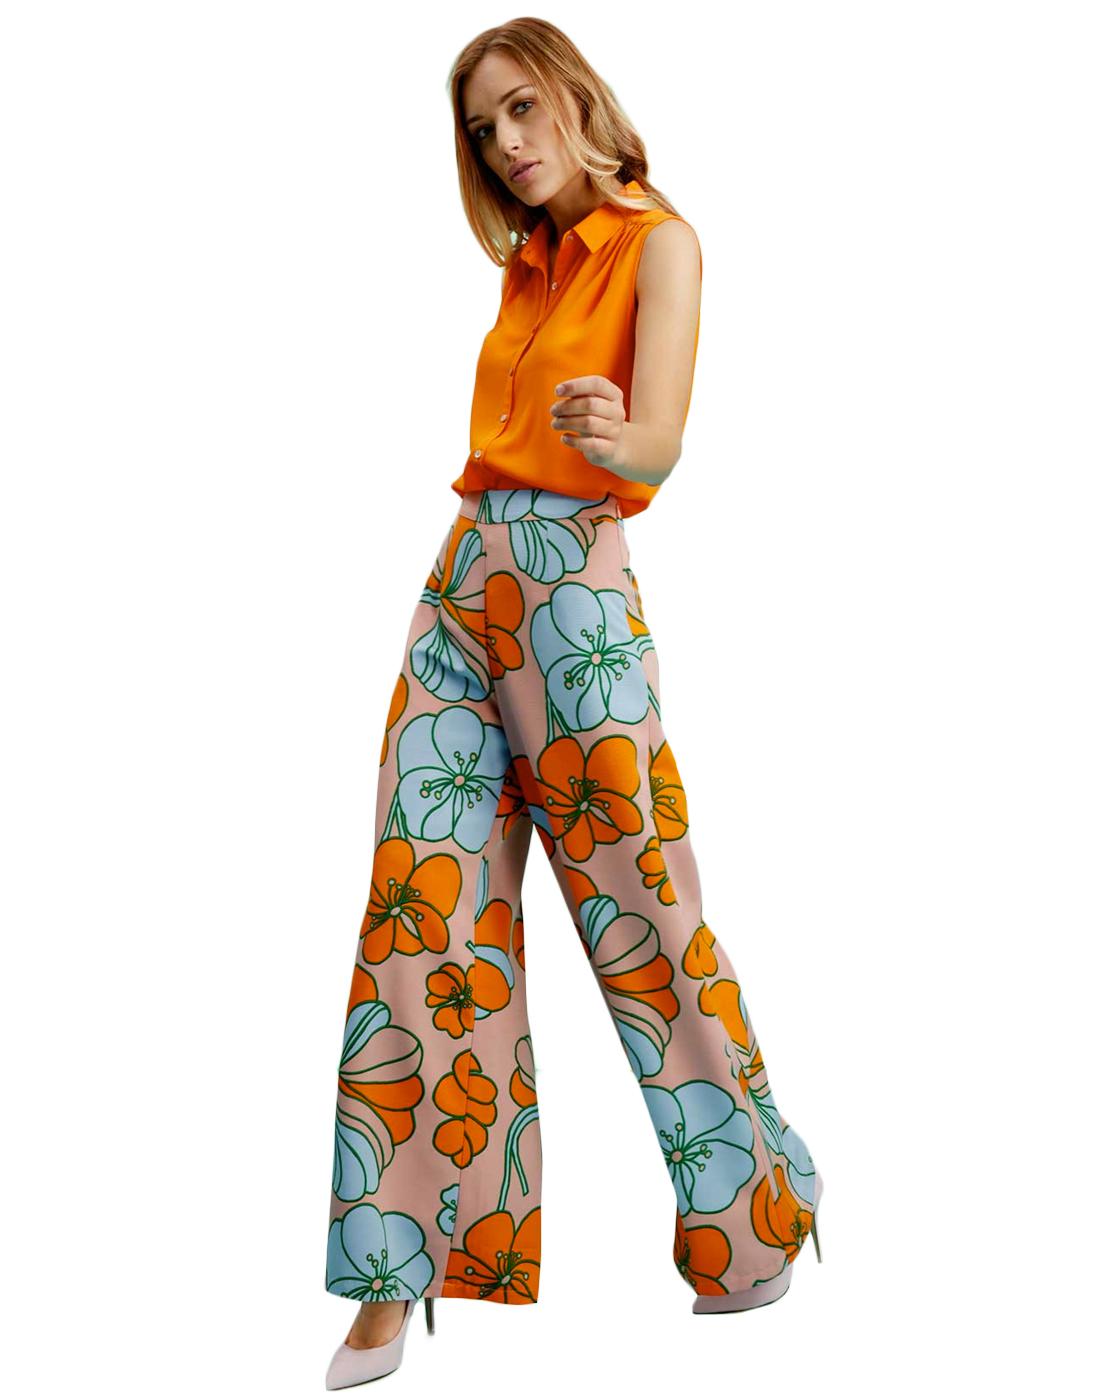 https://aws.atomretro.com/products/1400/traffic-people-60s-trousers1.jpg